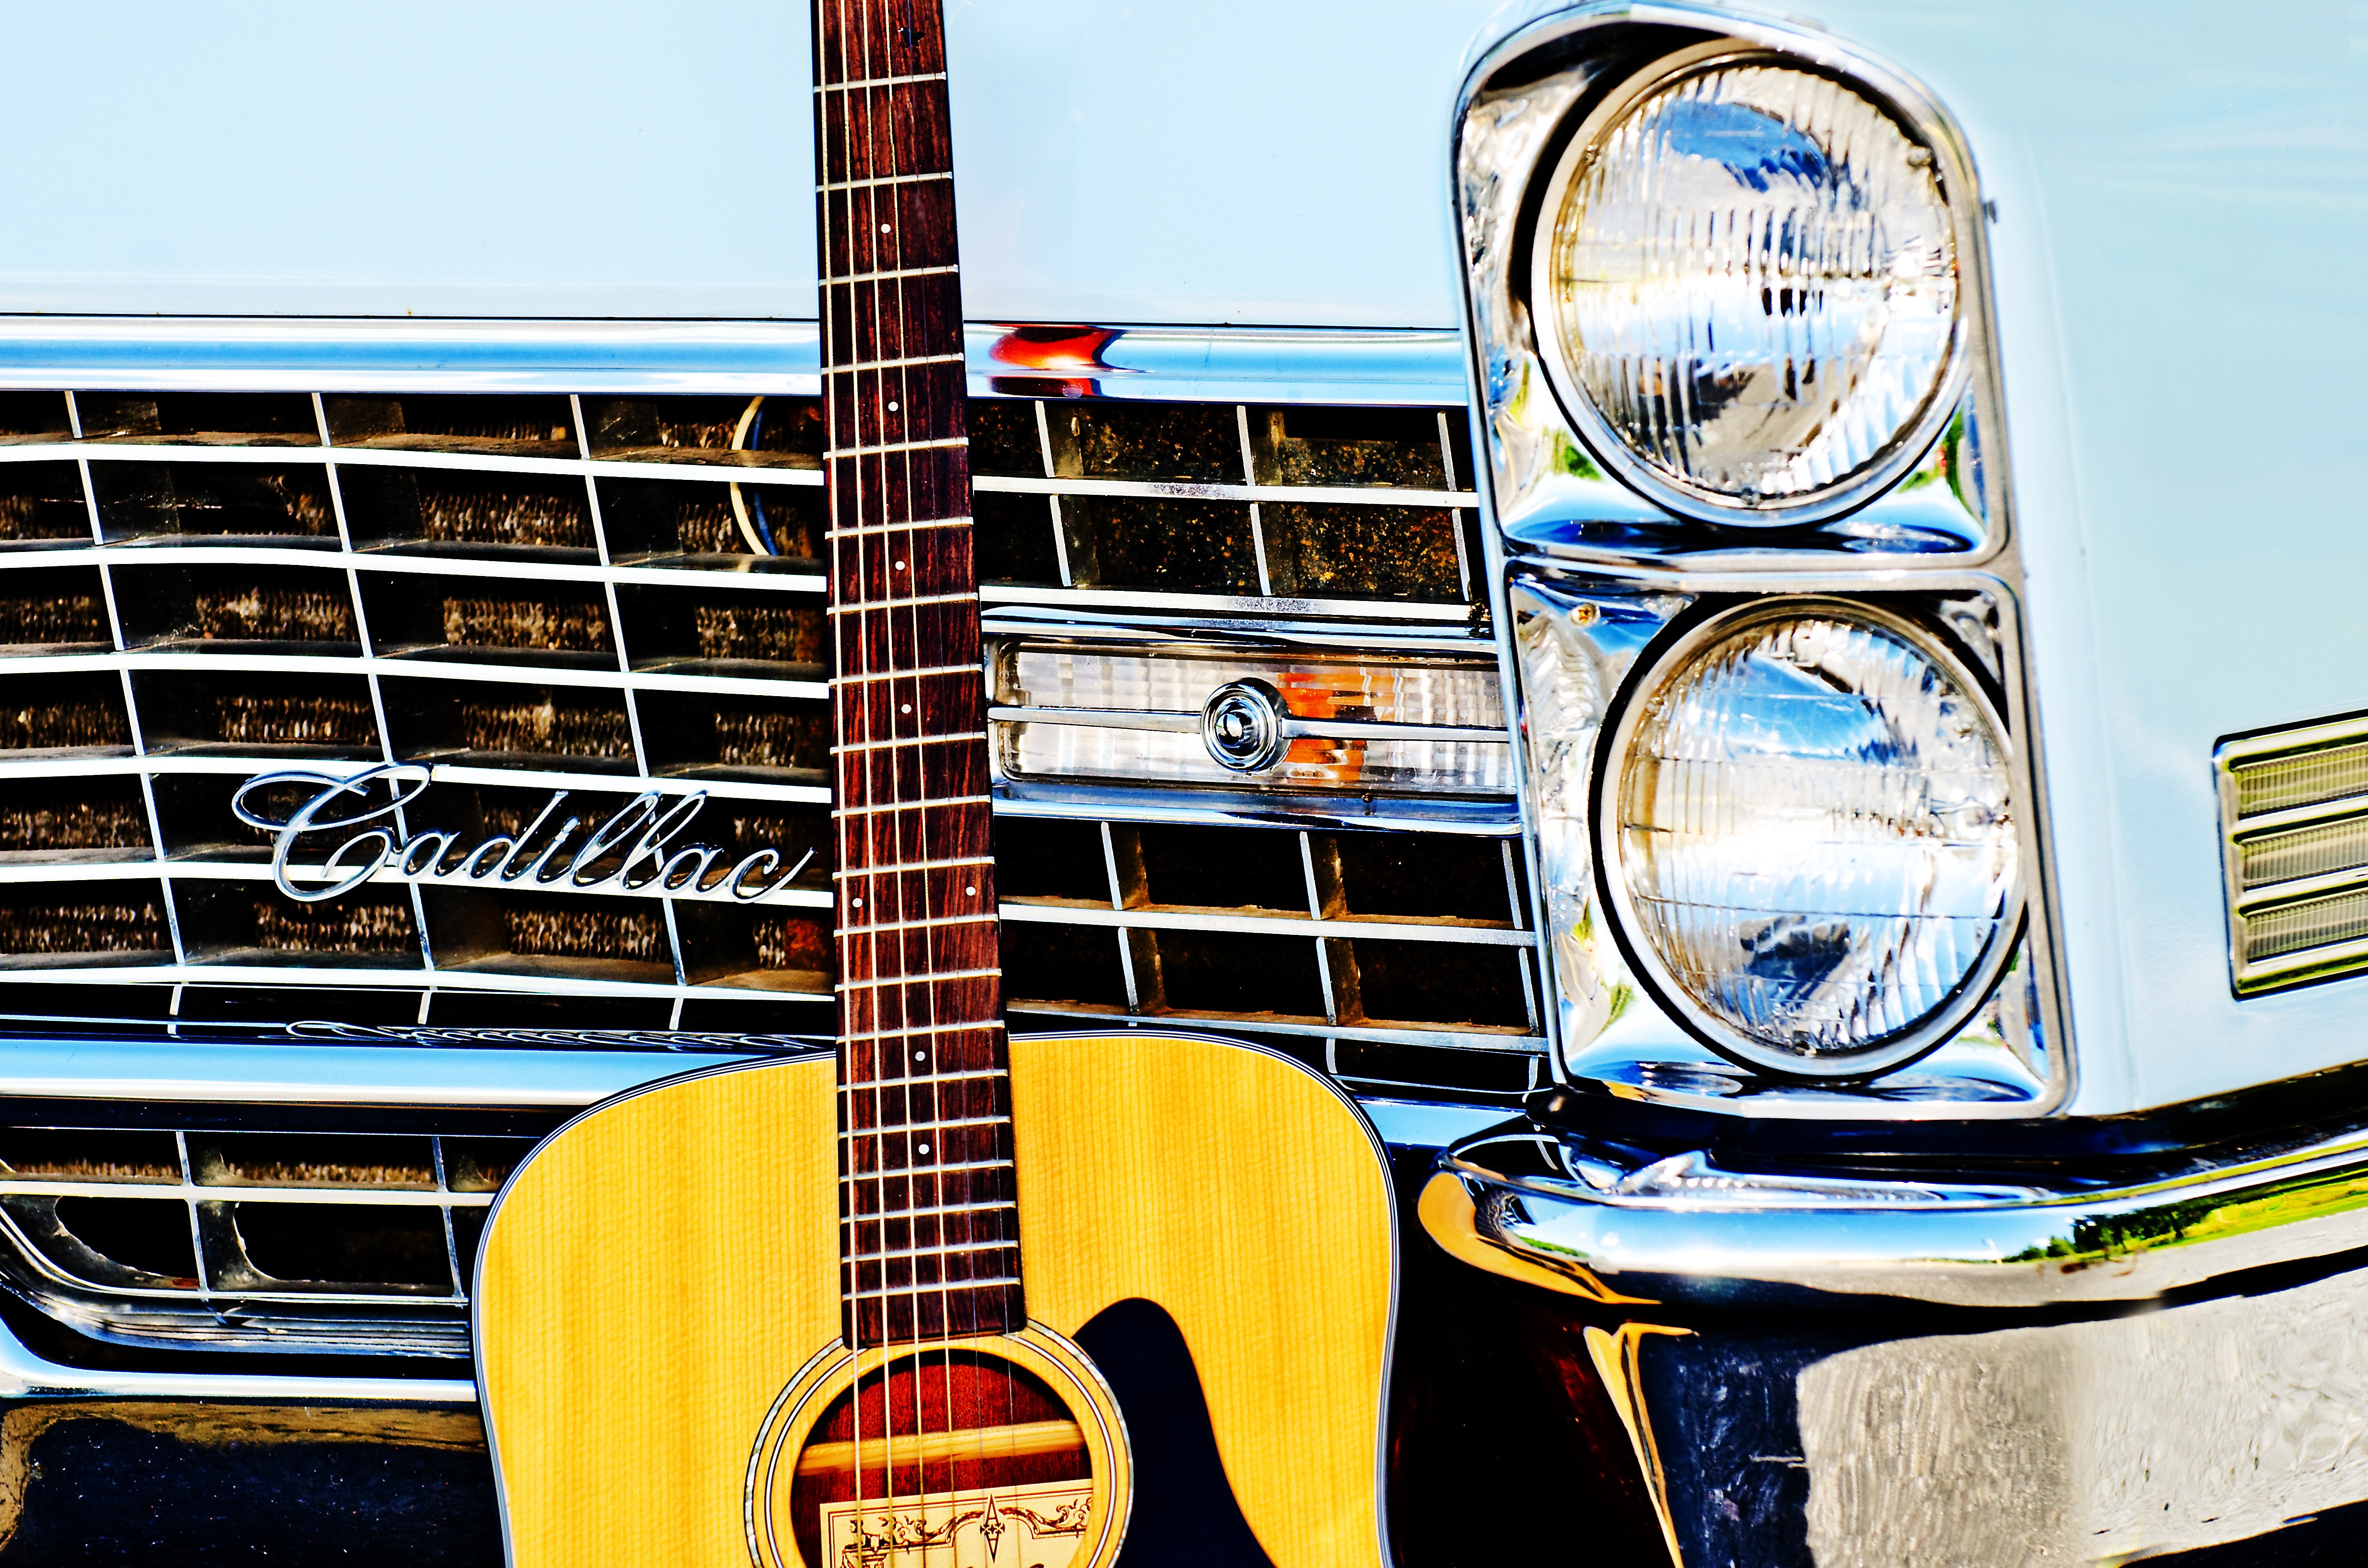 Headlights, Guitar, Vintage Car, retro styled, old-fashioned